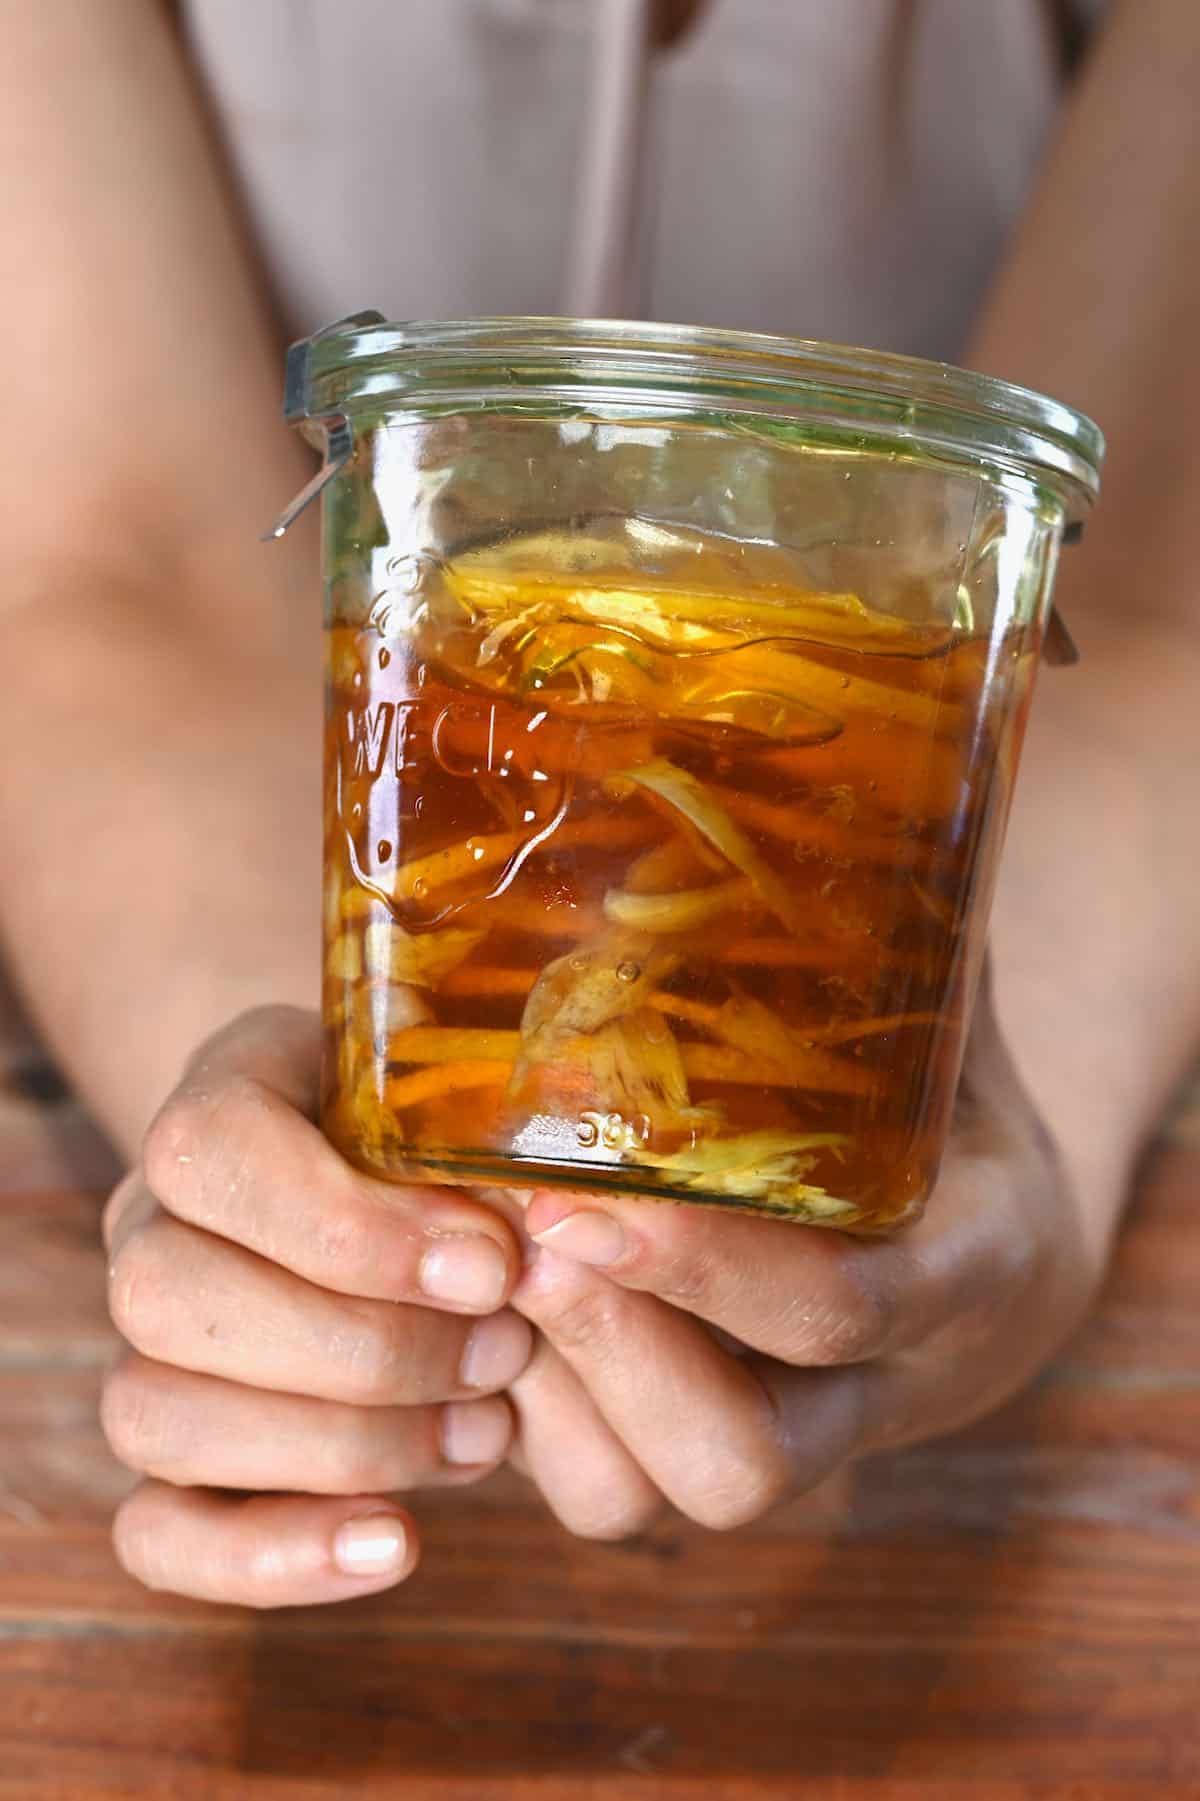 Holding a jar with honey ferment